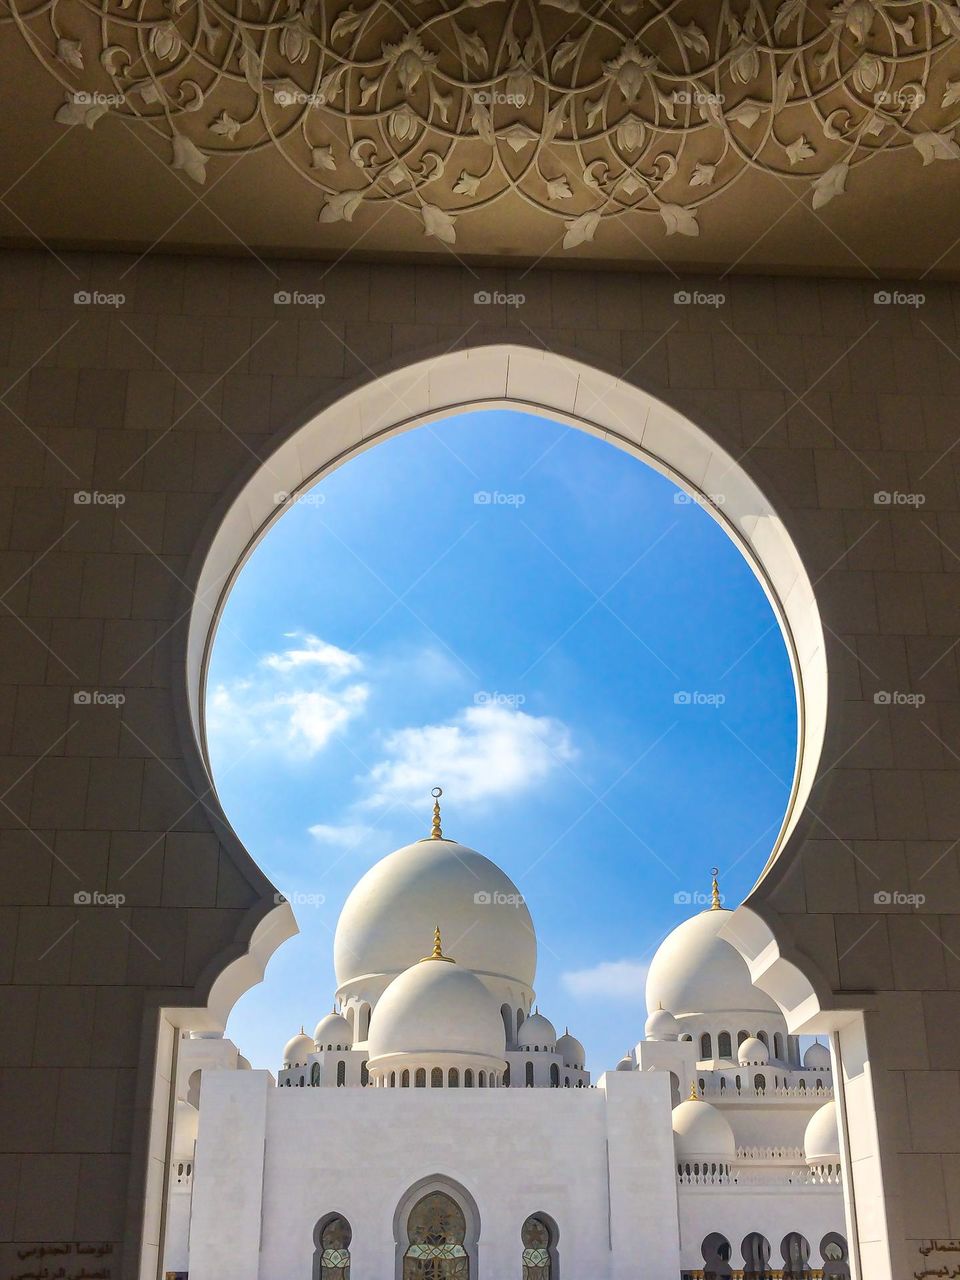 mobile photo architecture, mosque in Abu Dhabi white domes